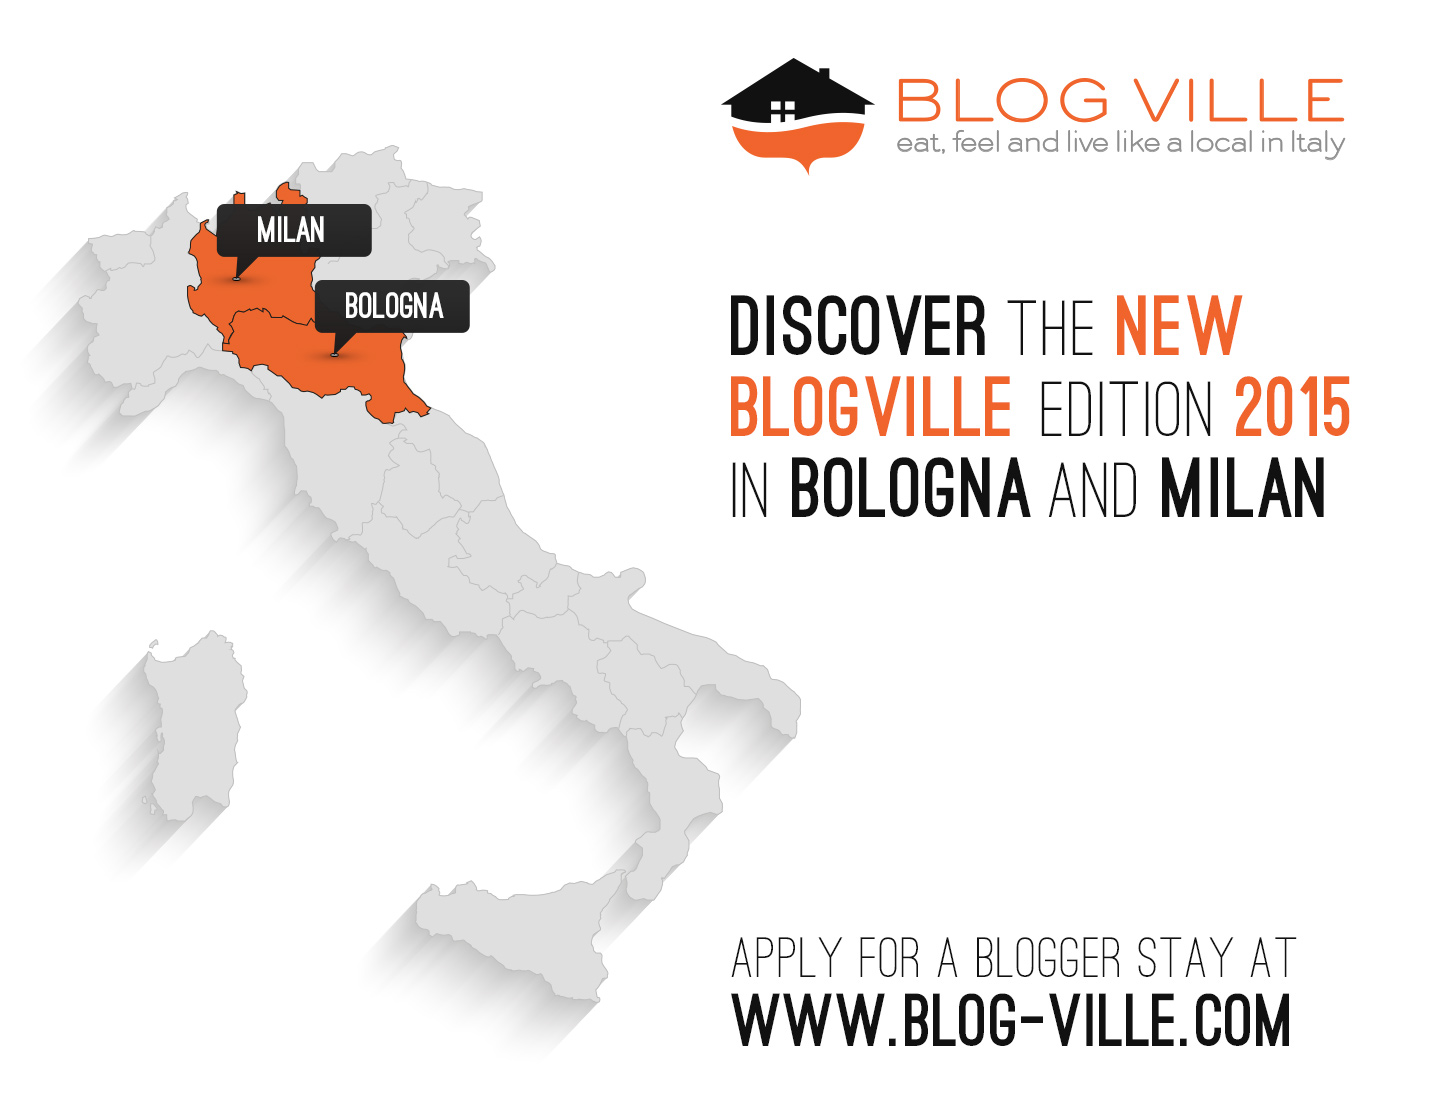 BlogVille Italy returns for the 4th year